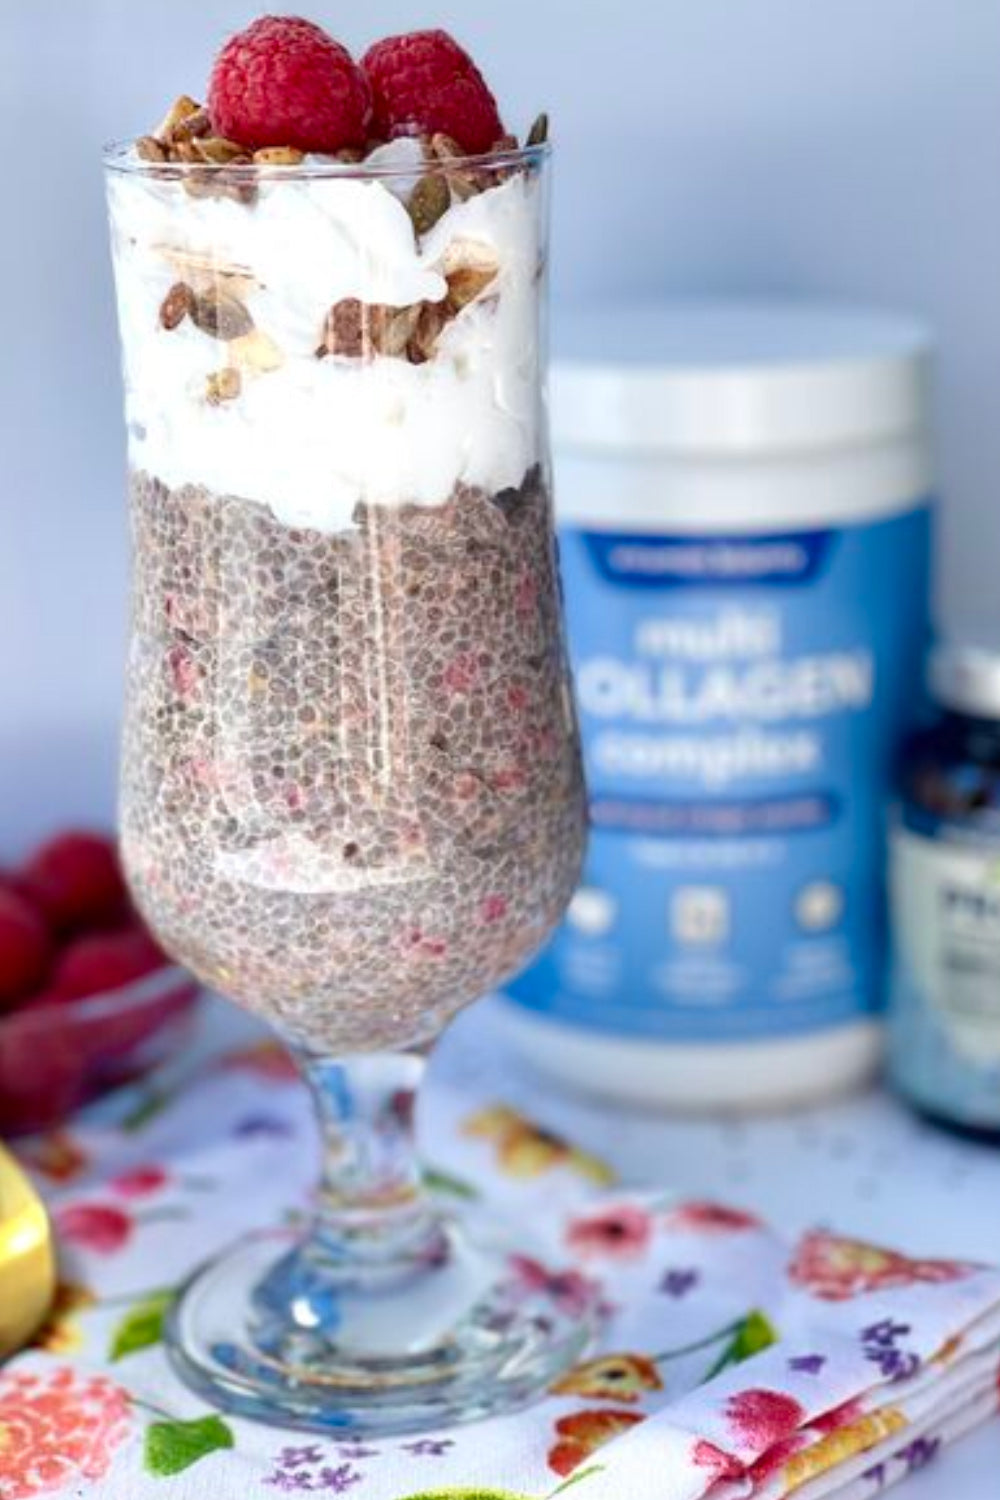 Multi Collagen Complex Chia Seed Pudding Parfait pictured in a tall glass with whipped cream and raspberries on top